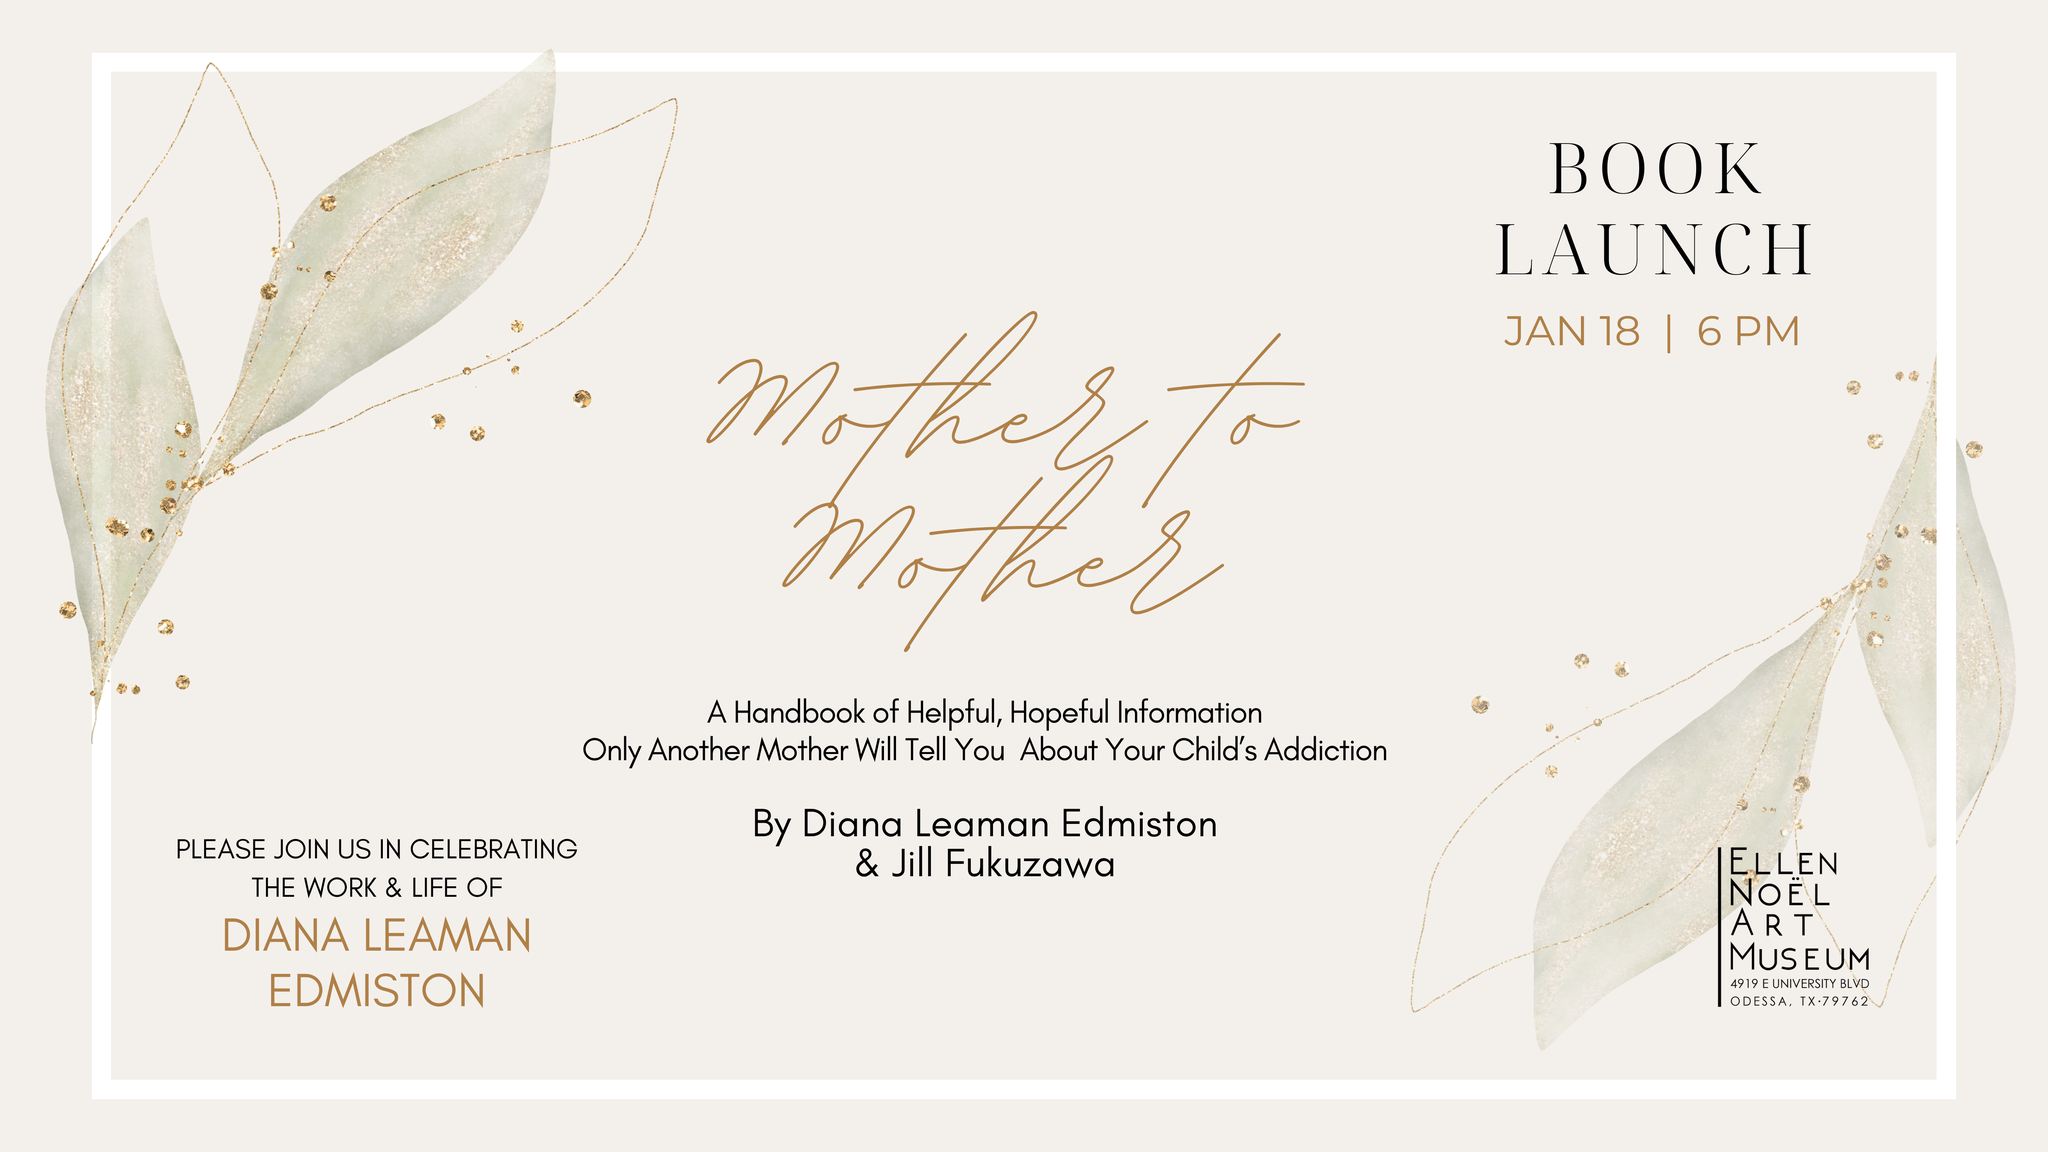 Mother to Mother Book Launch on January 18, 2024 at the Ellen Noel Art Museum